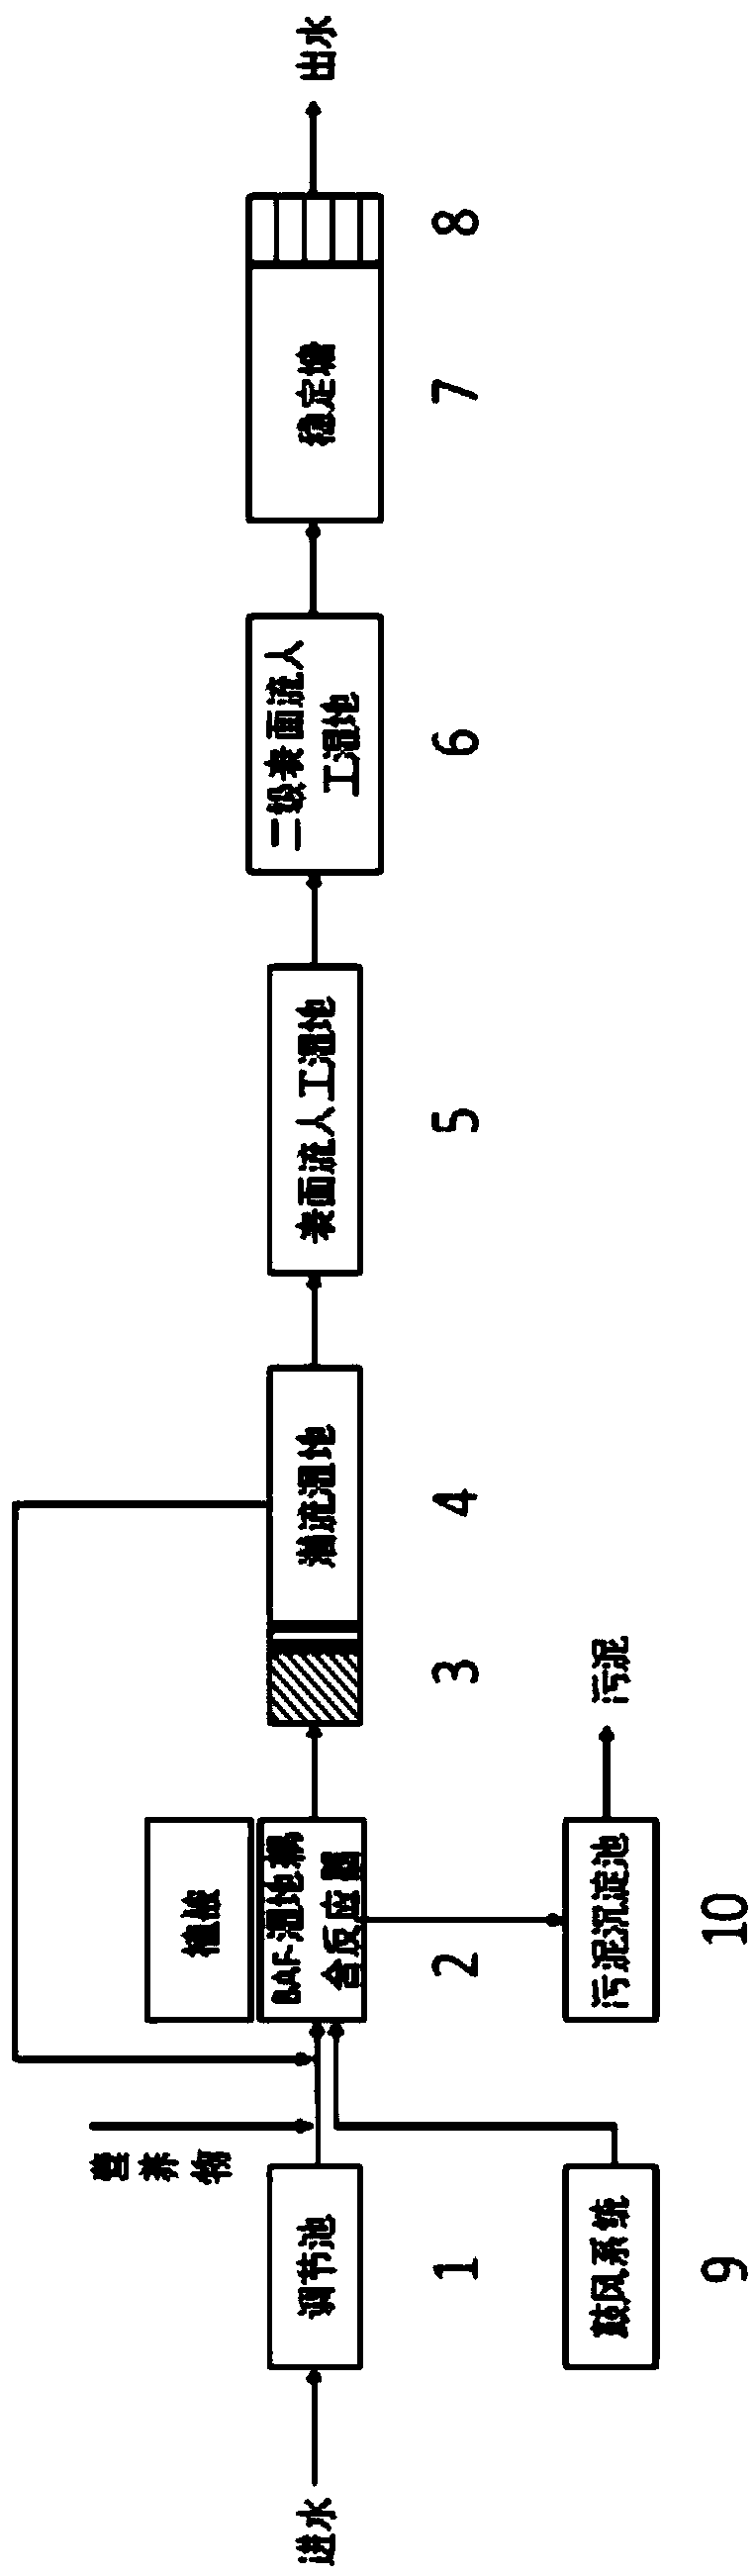 Multiple-technique coupled efficient constructed wetland treatment system and method